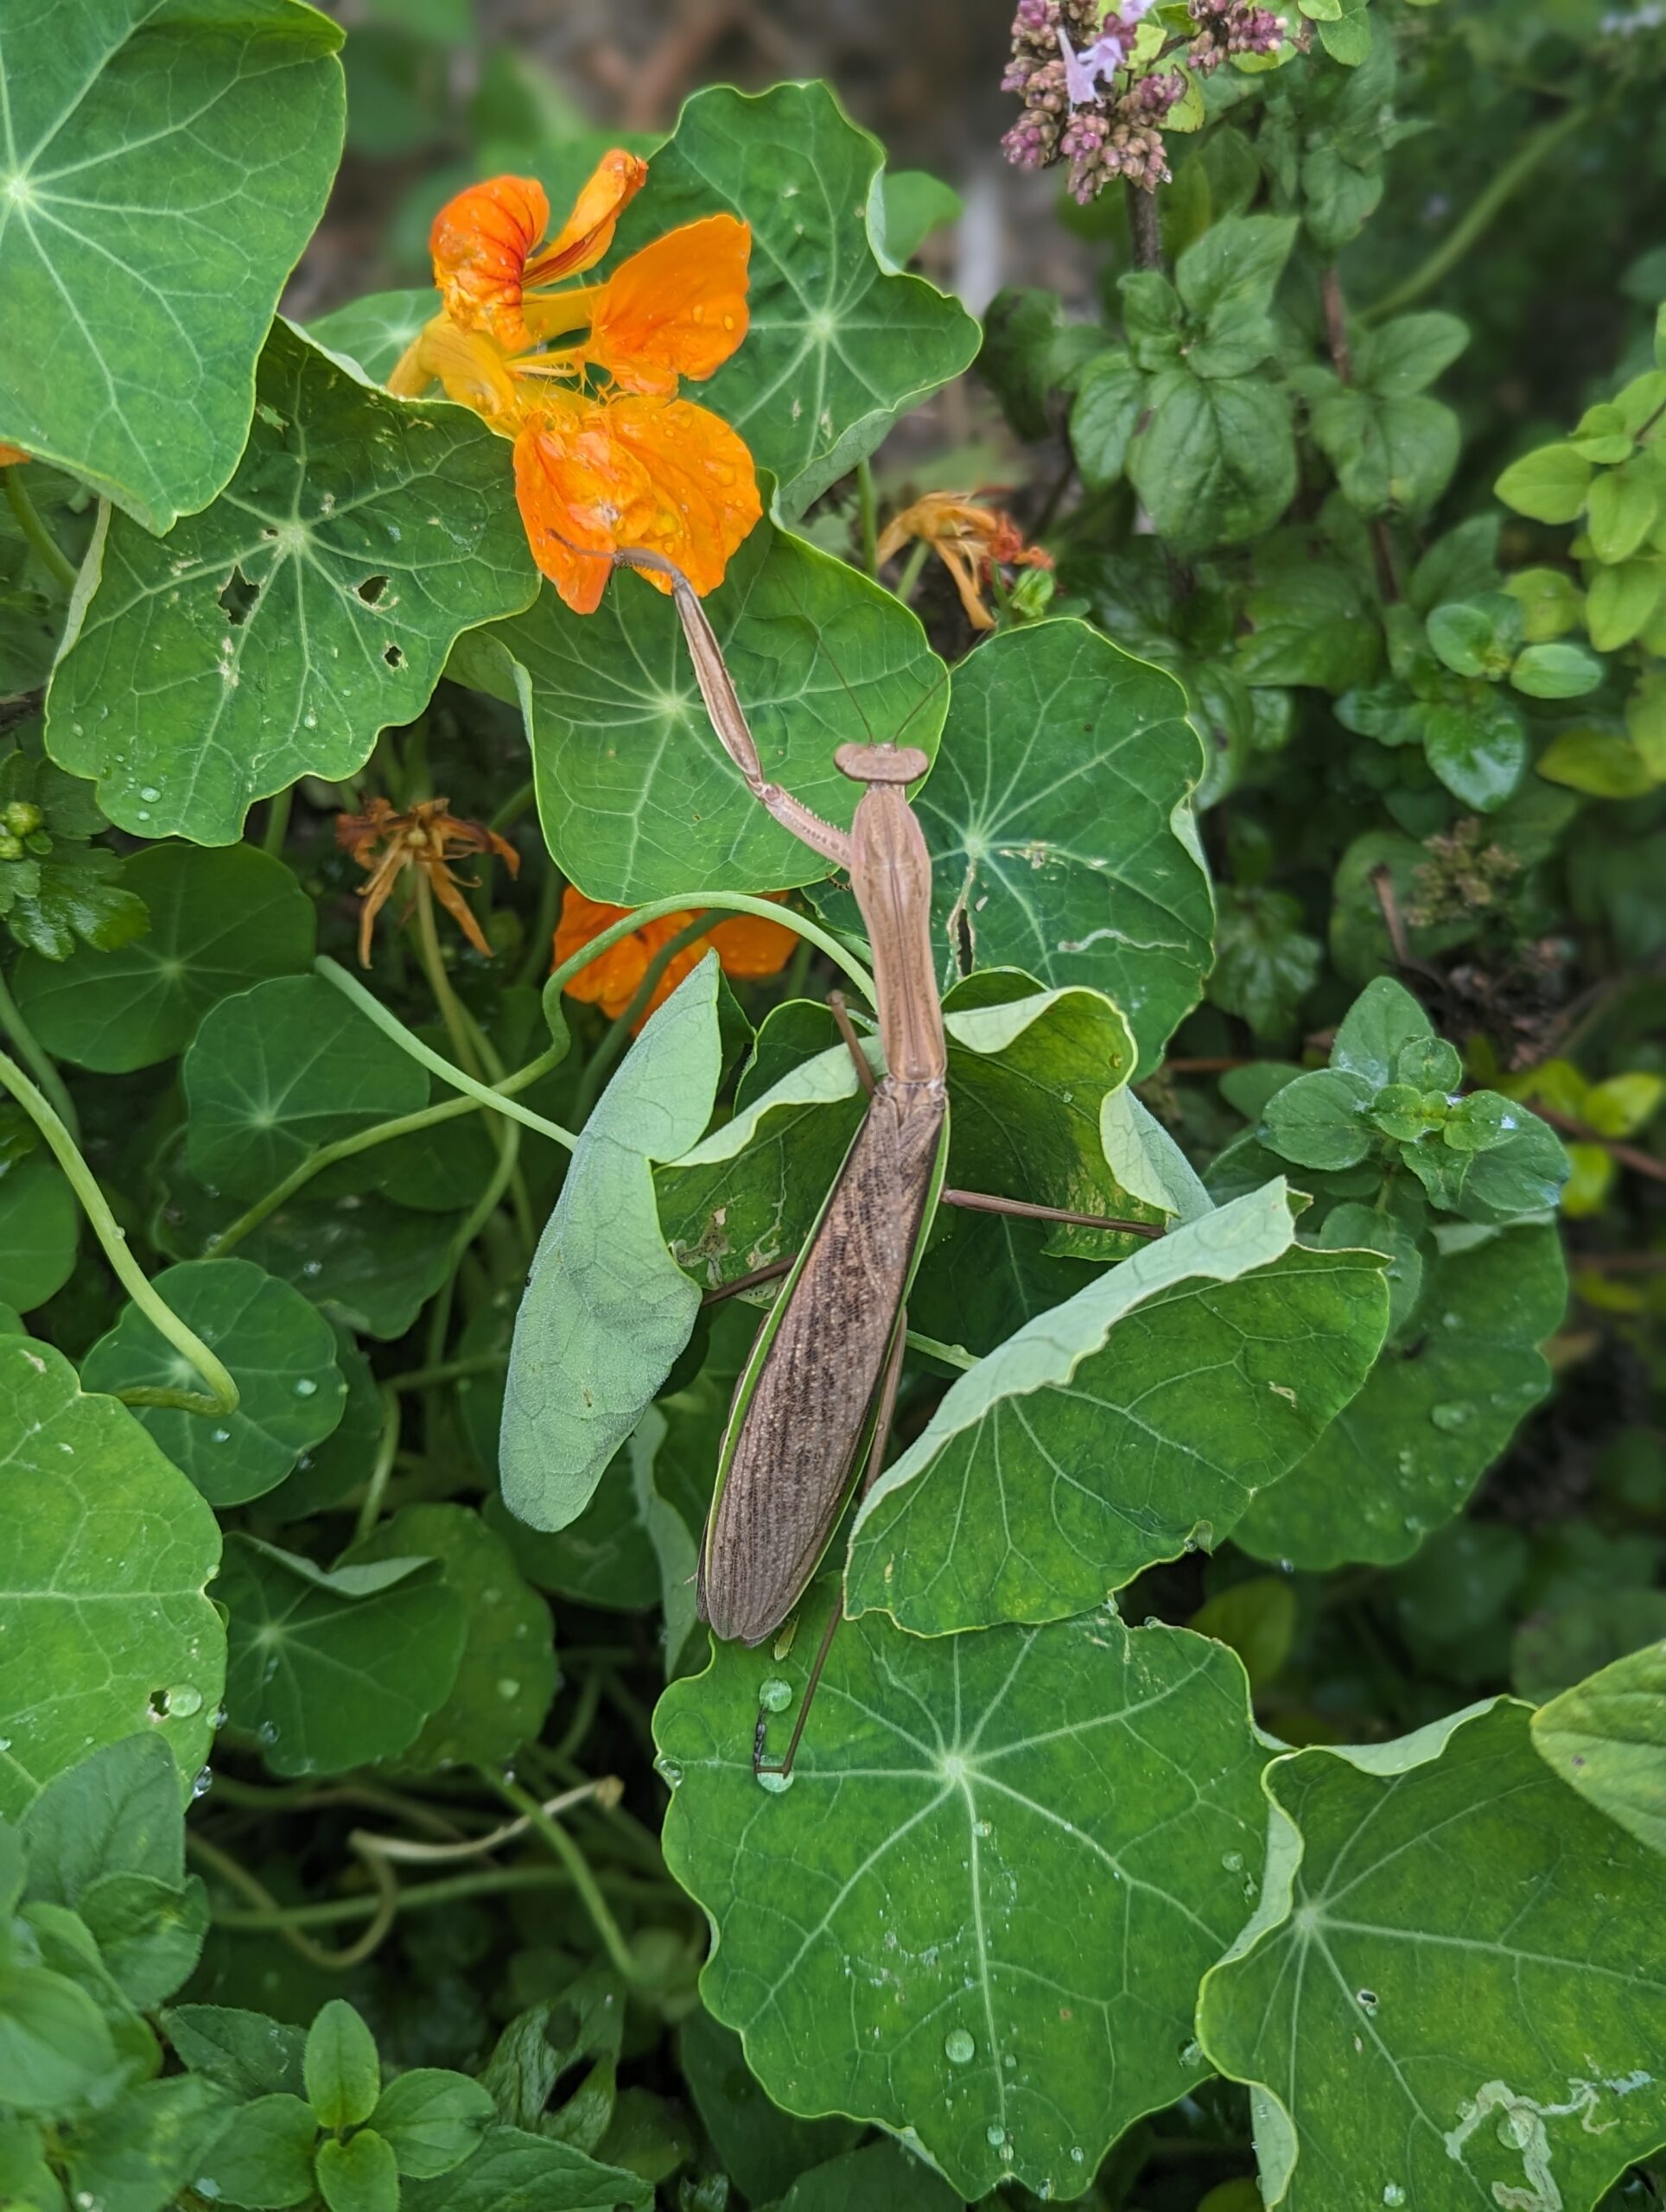 Light brown preying mantis, with one leg extended forward, sitting a top green nasturtium leaves.